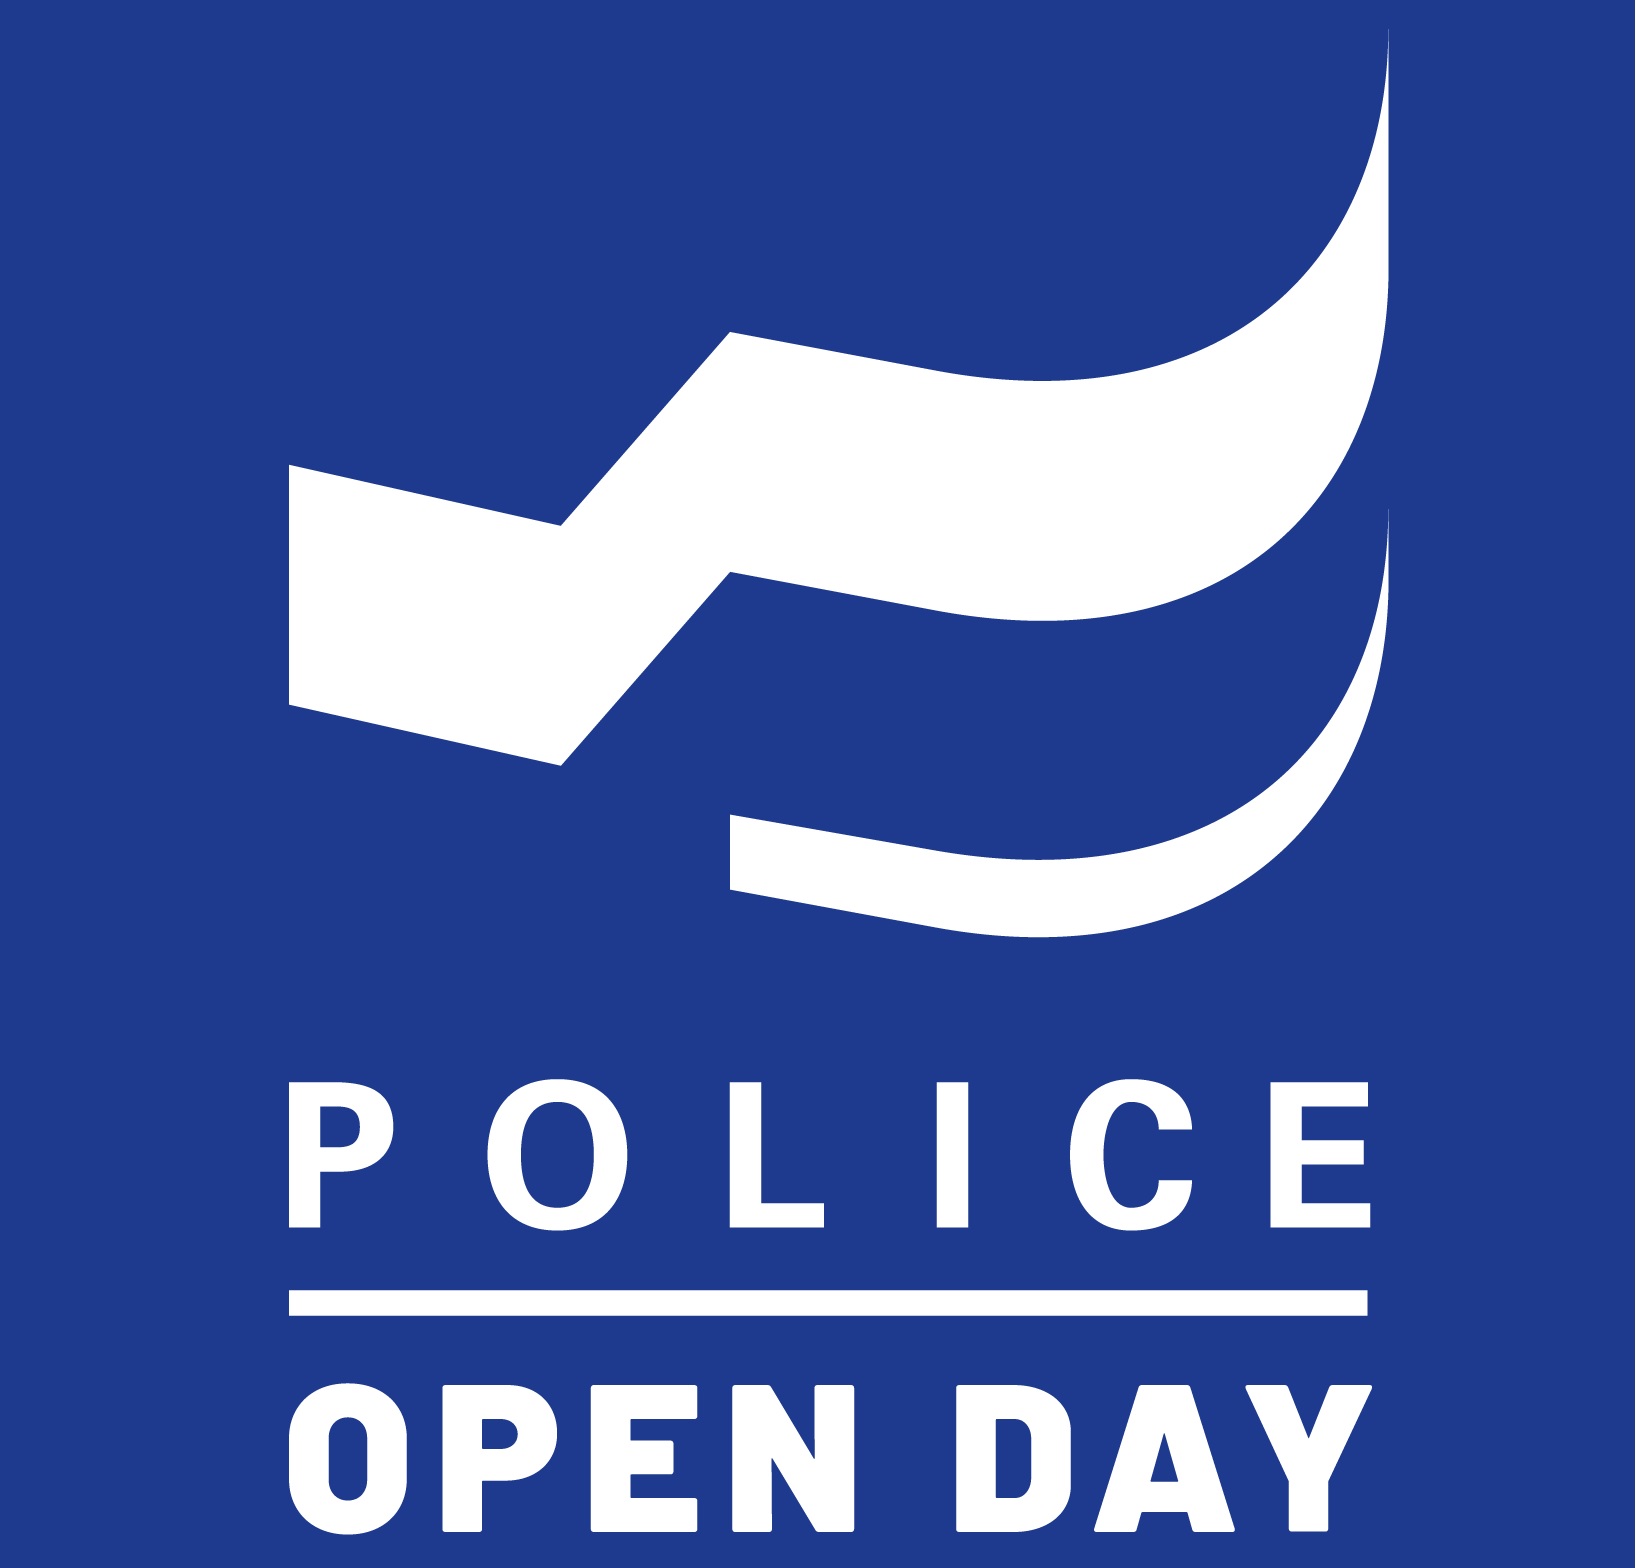 Police open day